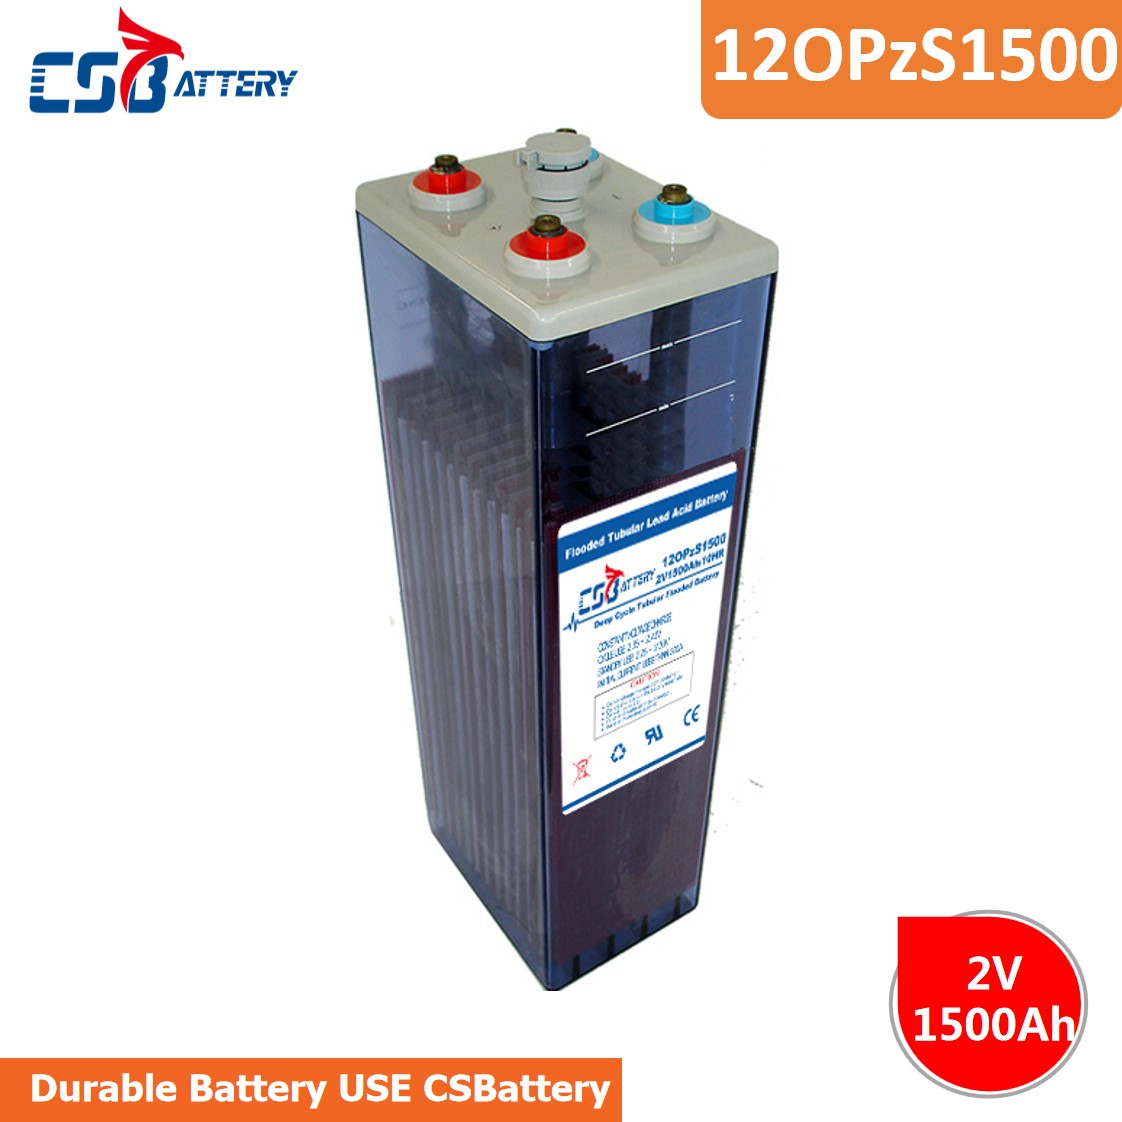 Csbattery 2V1500ah Tubular Opzs Battery for Telecome/UPS/Railway/Security/Medical/Alarm/Cable-TV-Appliation